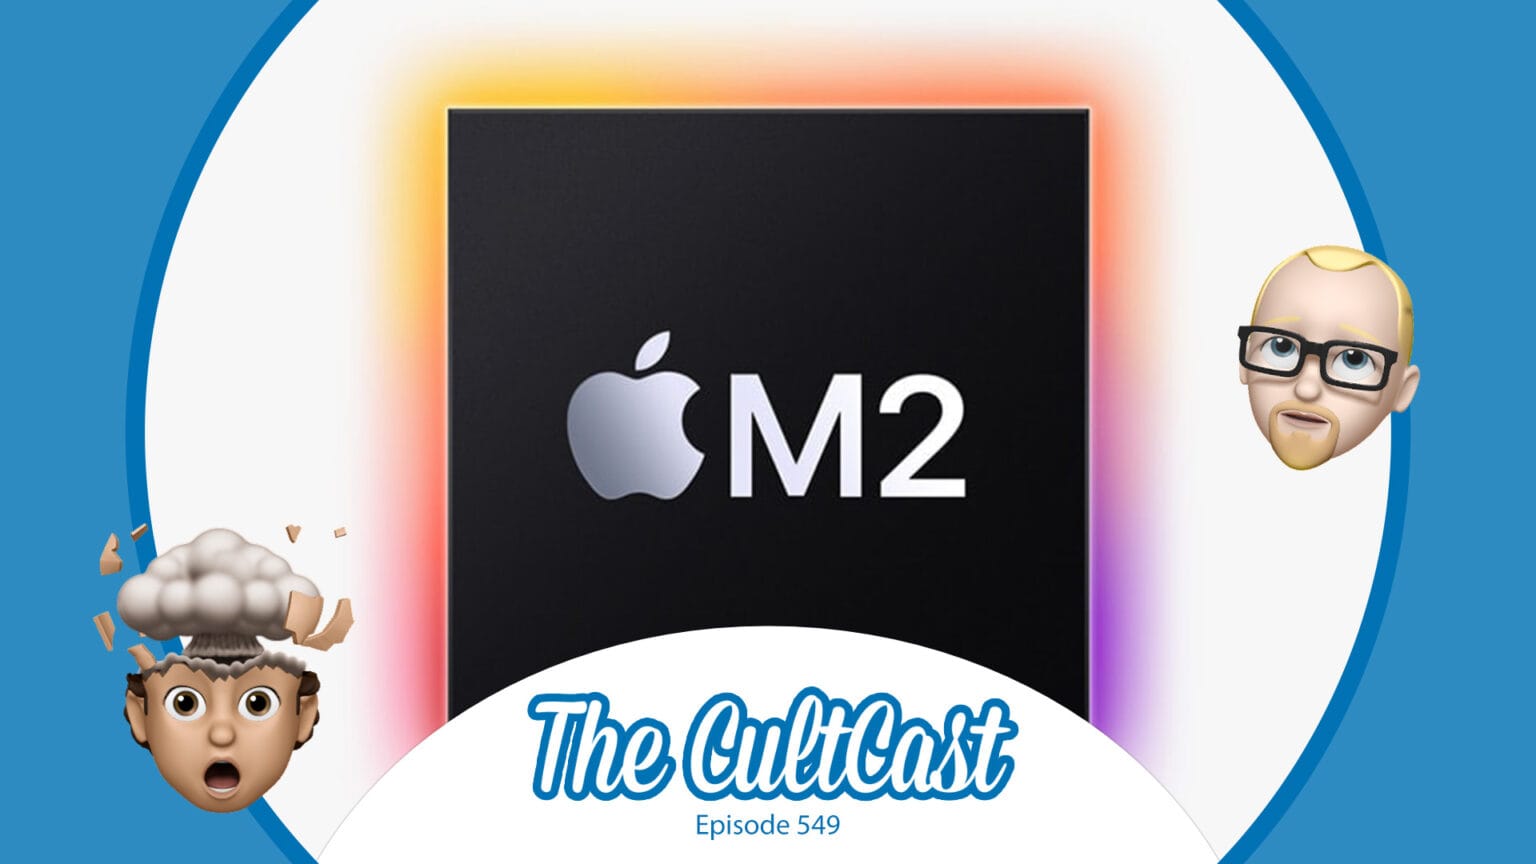 The CultCast 549: Time to walk back that M2 skepticism just a smidge.